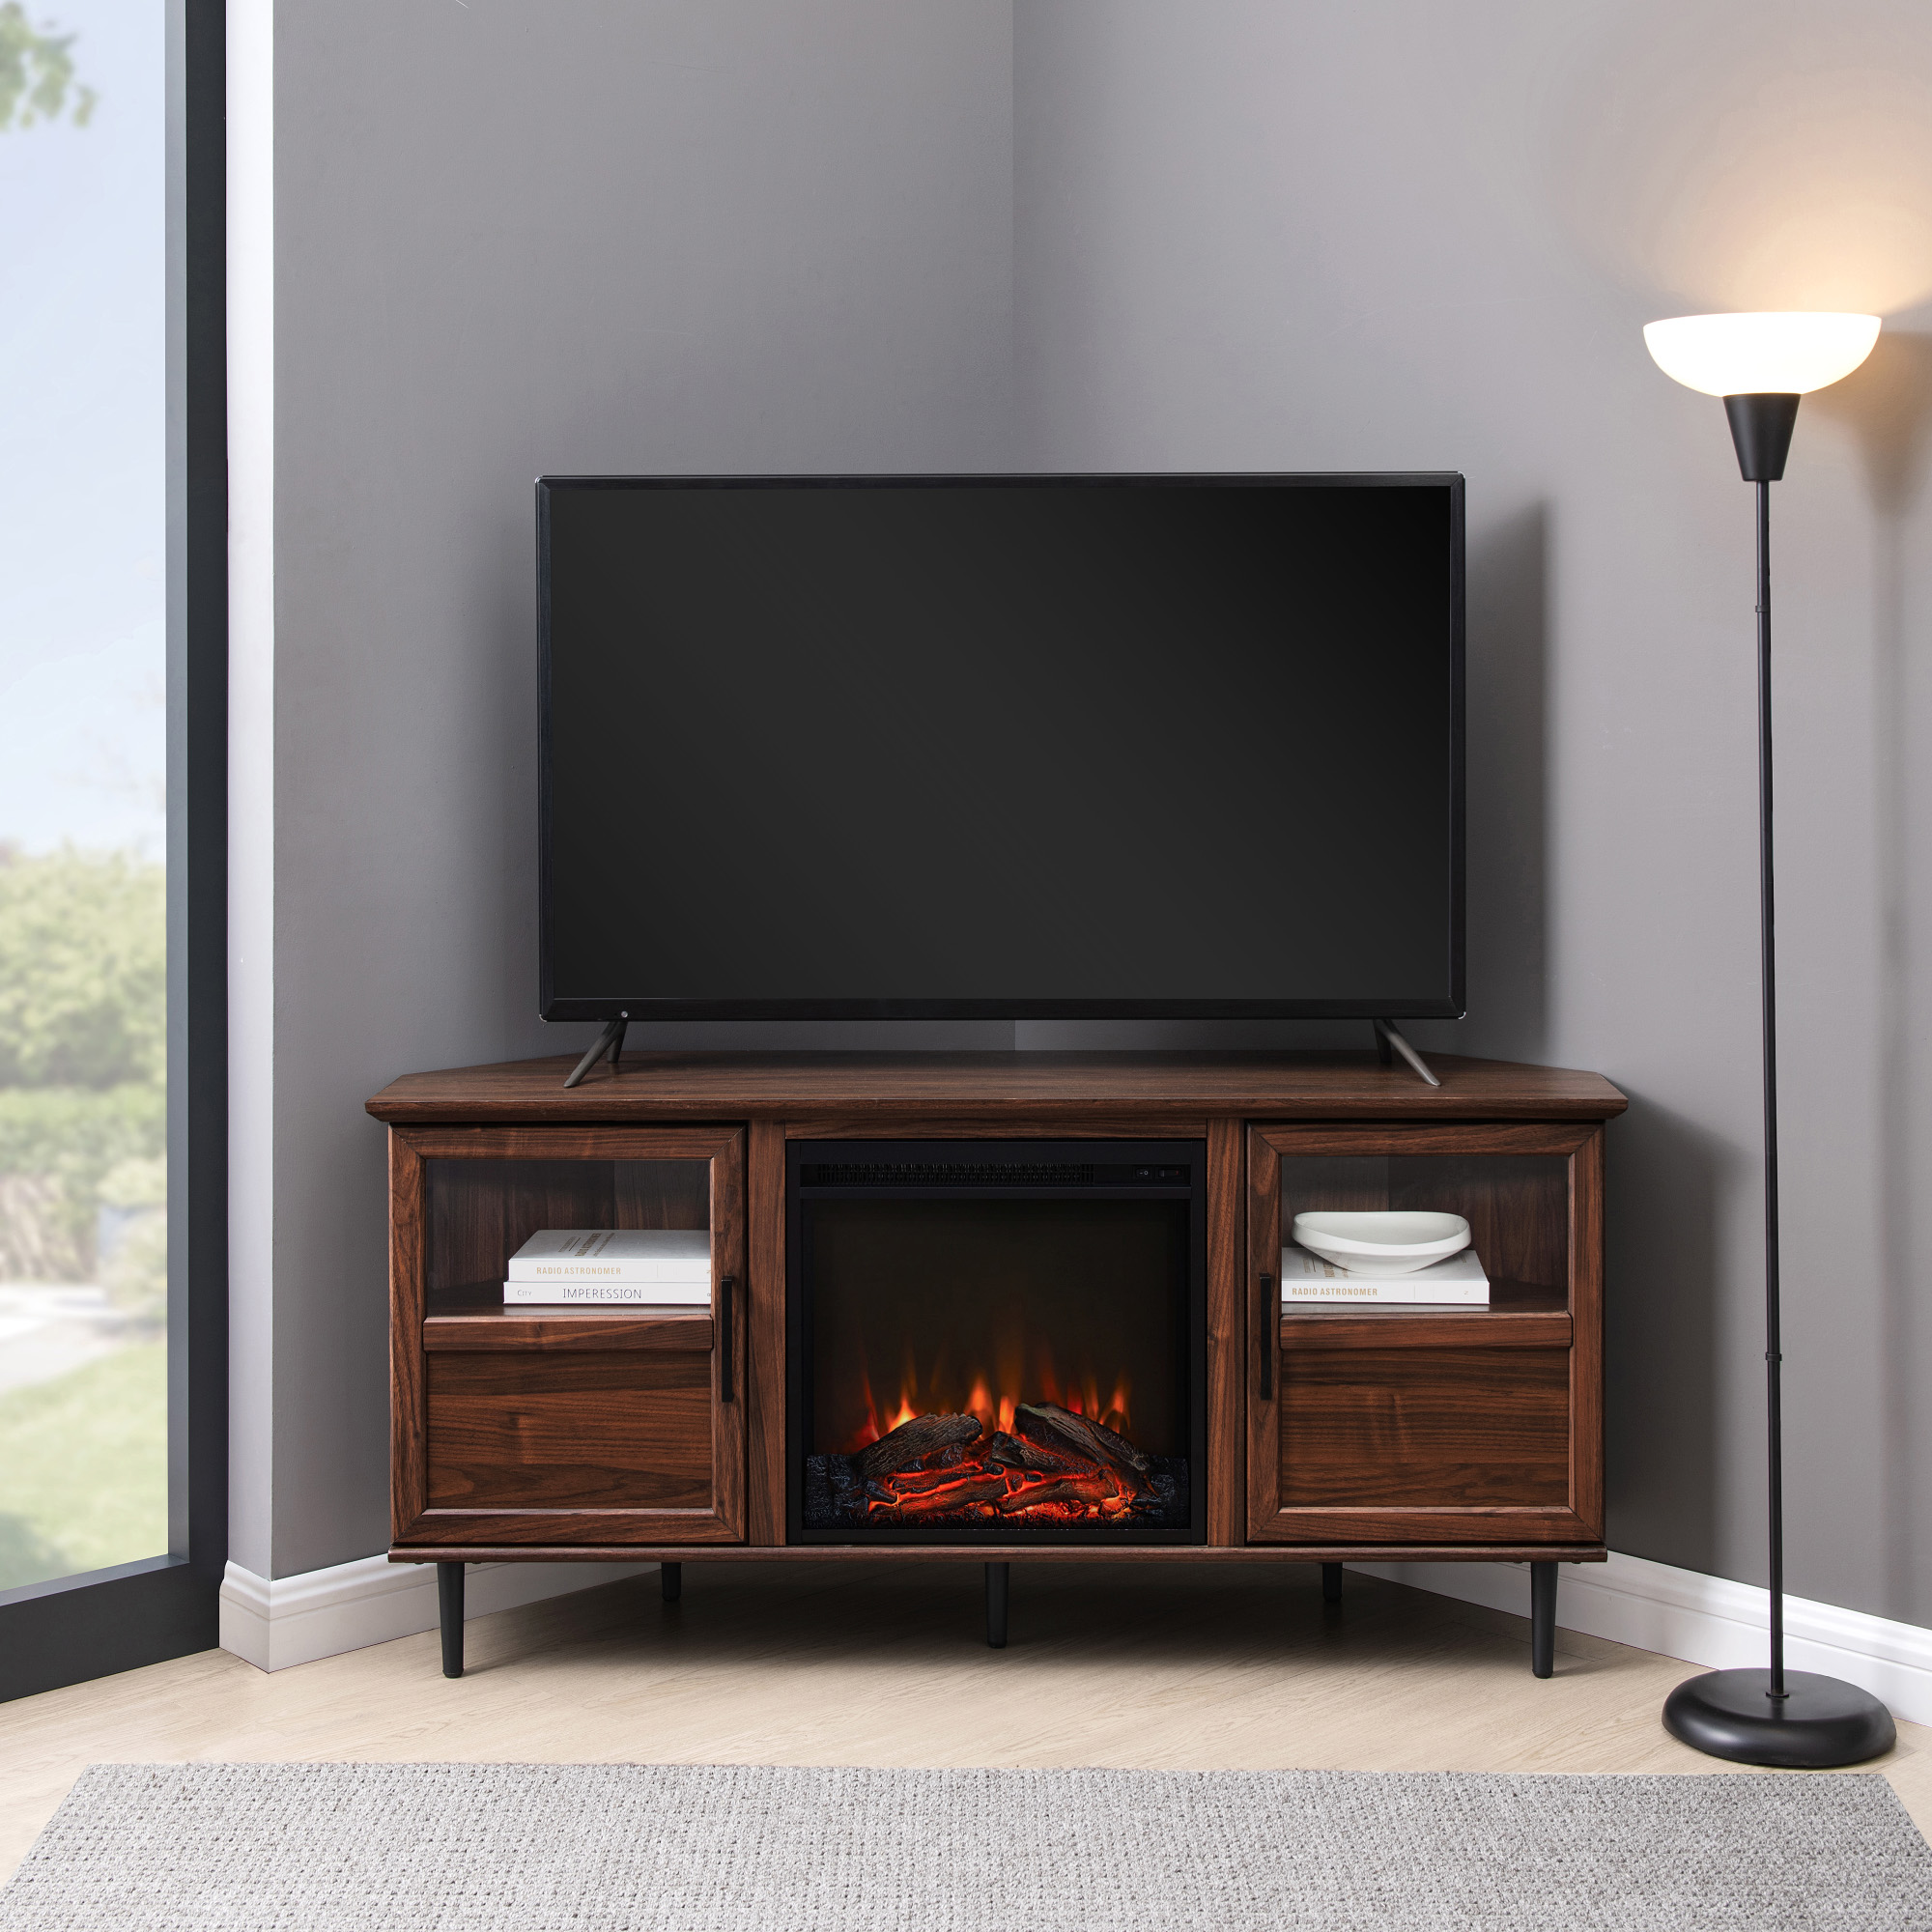 Walker Edison Panel Electric Fireplace Corner TV Stand for TVs up to 60”, Dark Walnut - image 2 of 11